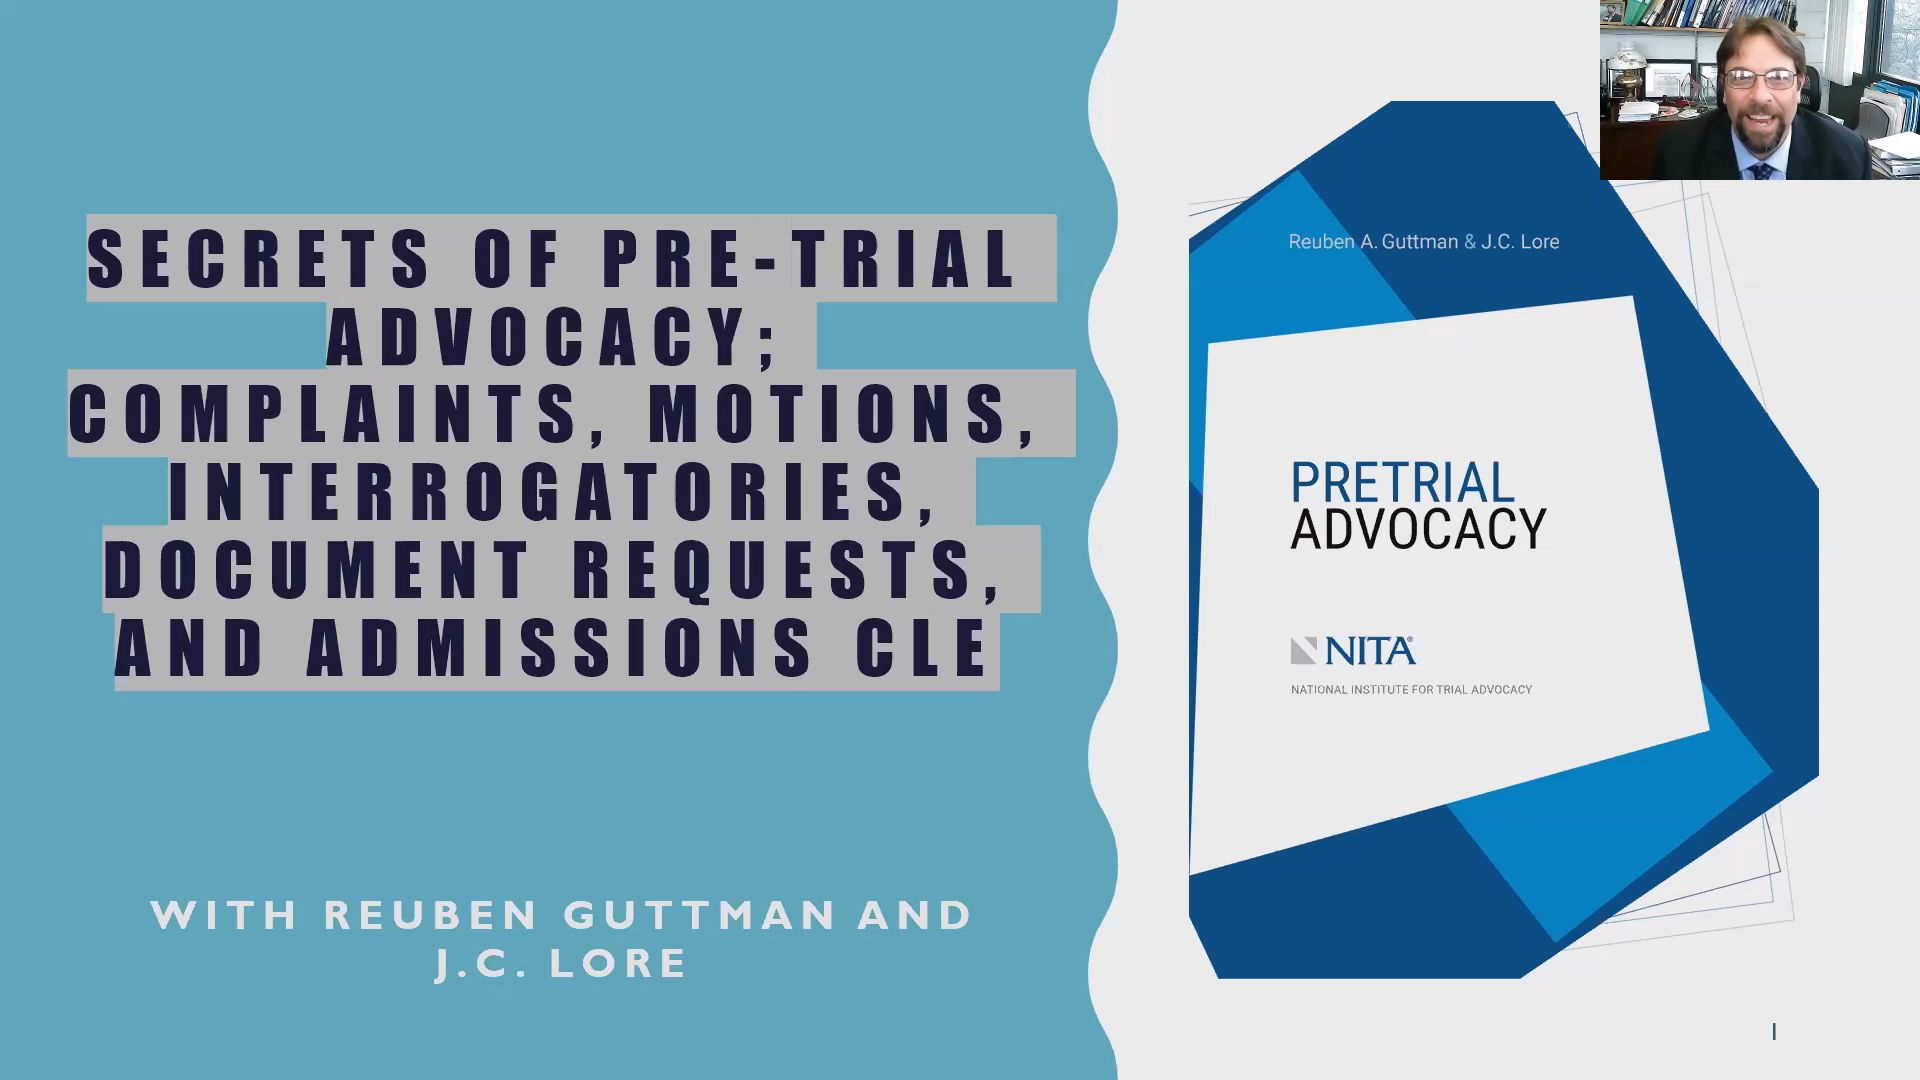 Front Loading the Litigation: The Keys to Pretrial Advocacy Thumbnail